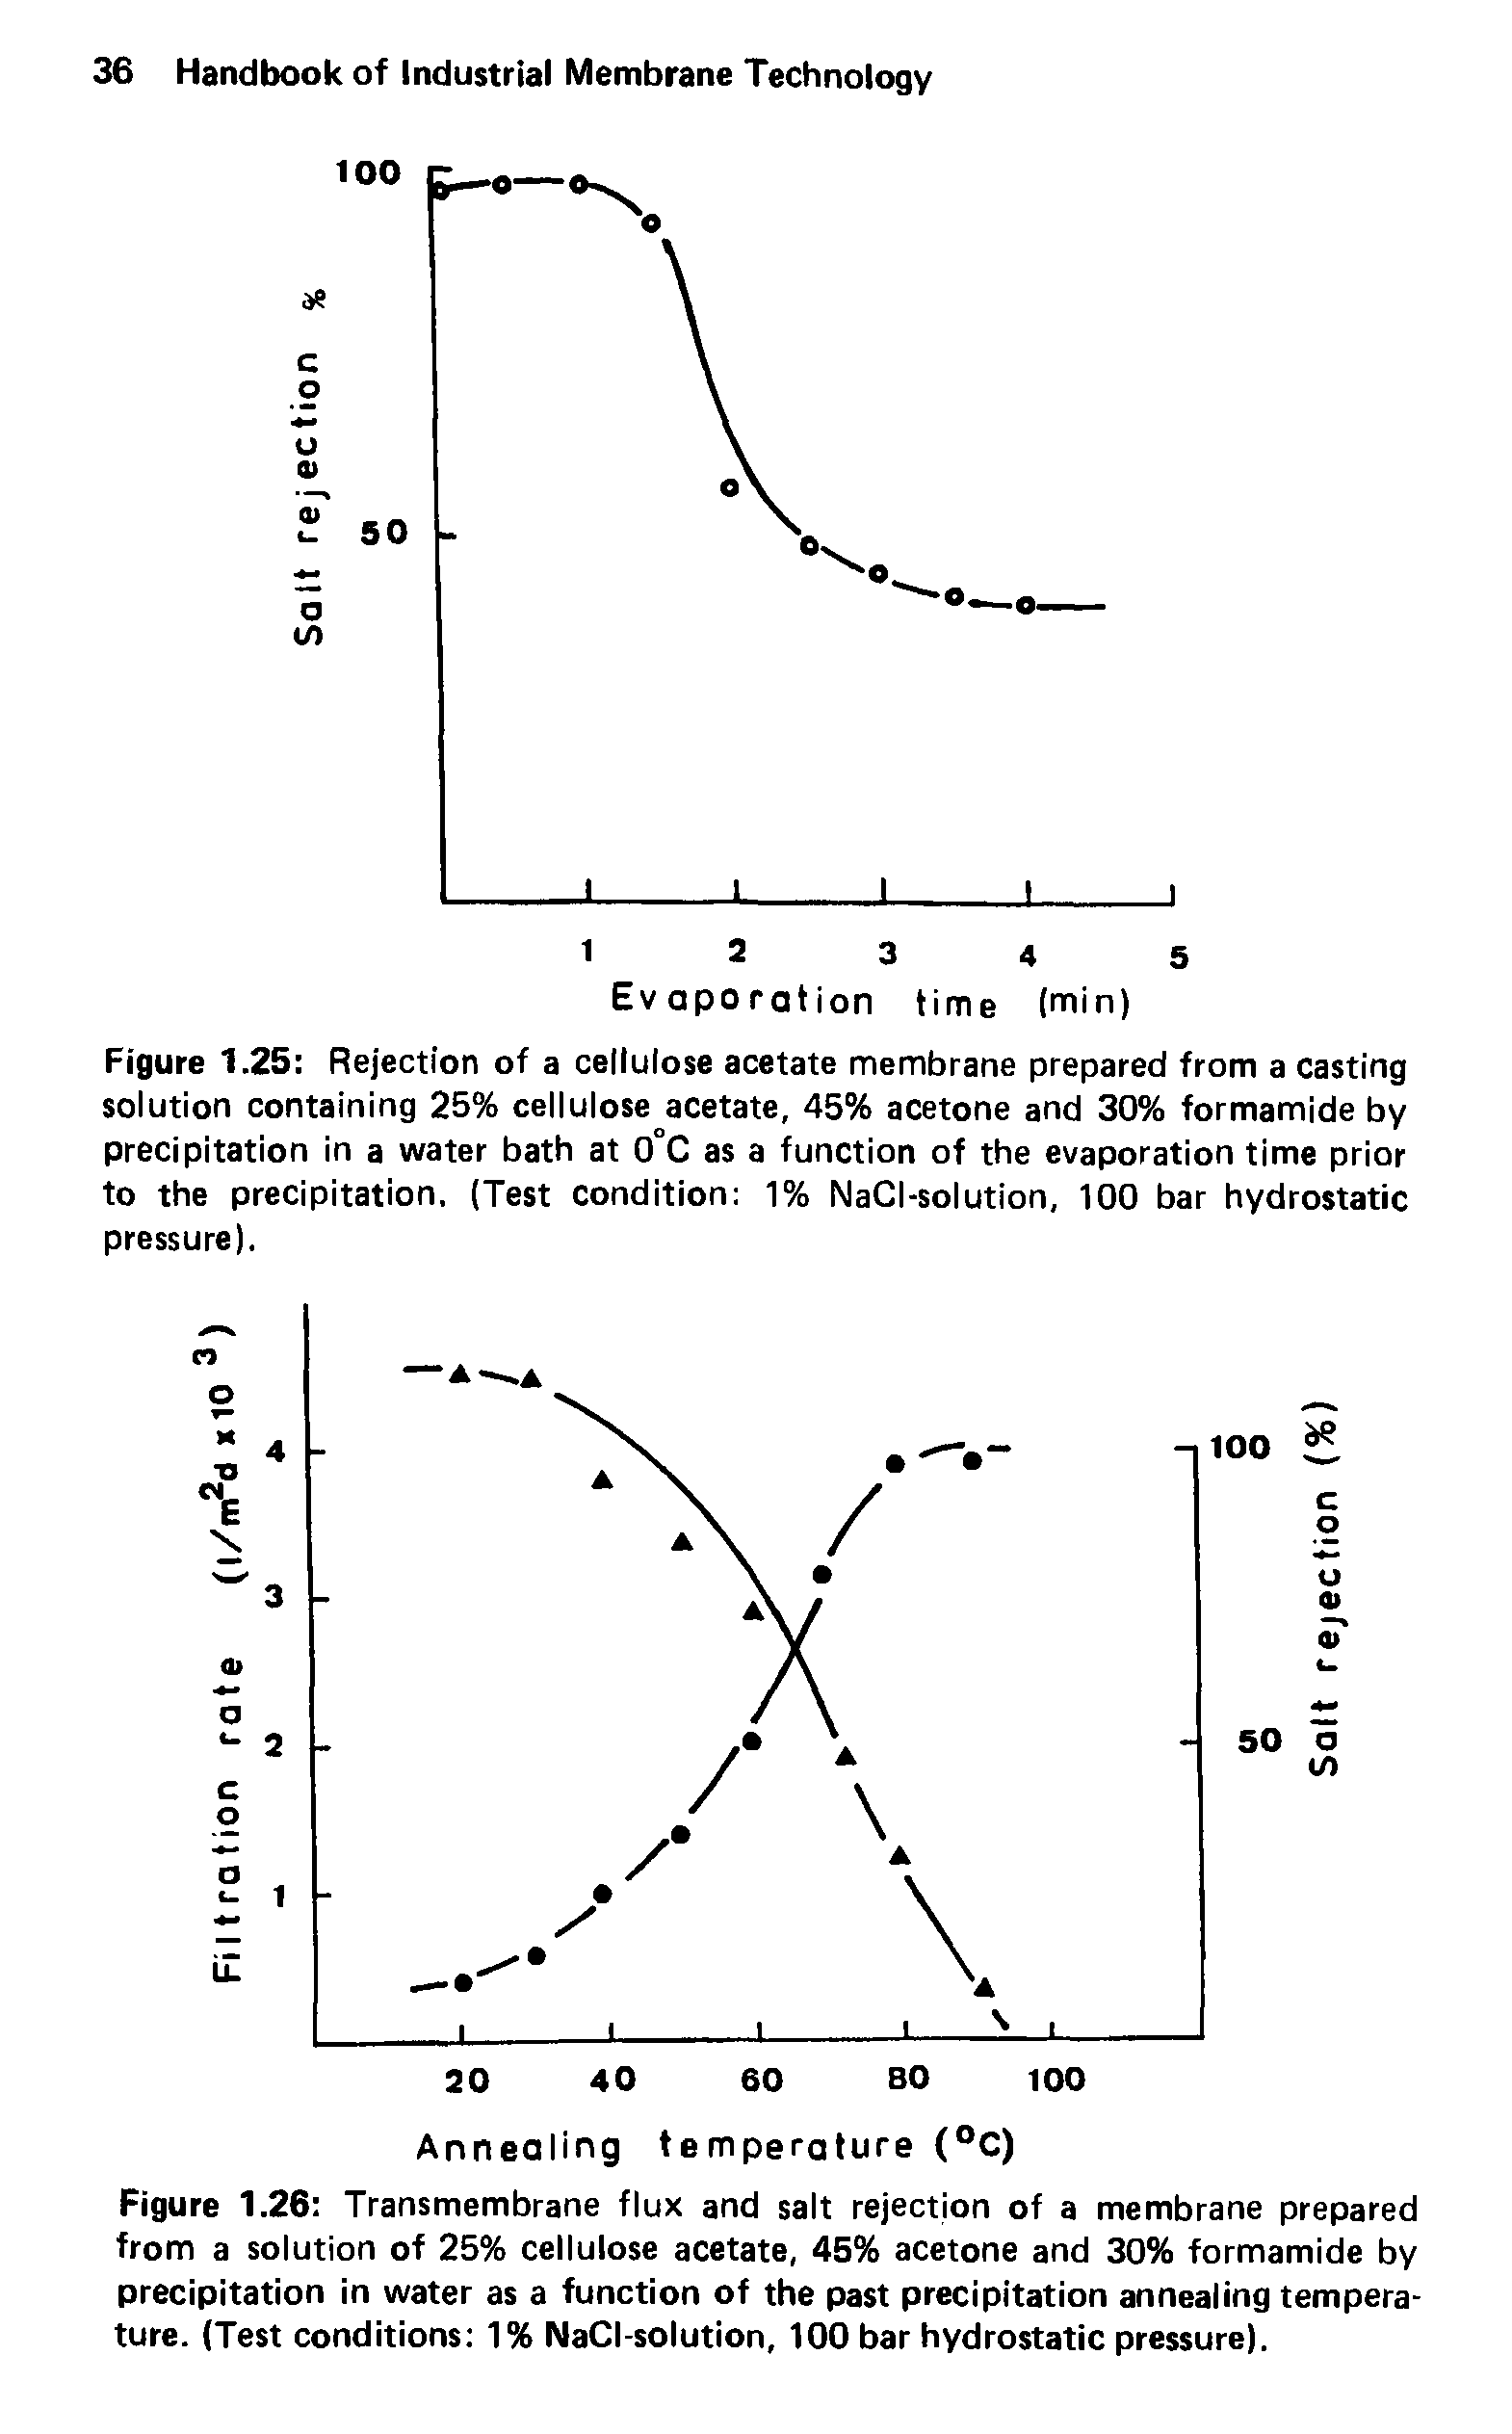 Figure 1.25 Rejection of a cellulose acetate membrane prepared from a casting solution containing 25% cellulose acetate, 45% acetone and 30% formamide by precipitation in a water bath at 0°C as a function of the evaporation time prior to the precipitation, (Test condition 1% NaCI-solution, 100 bar hydrostatic pressure).